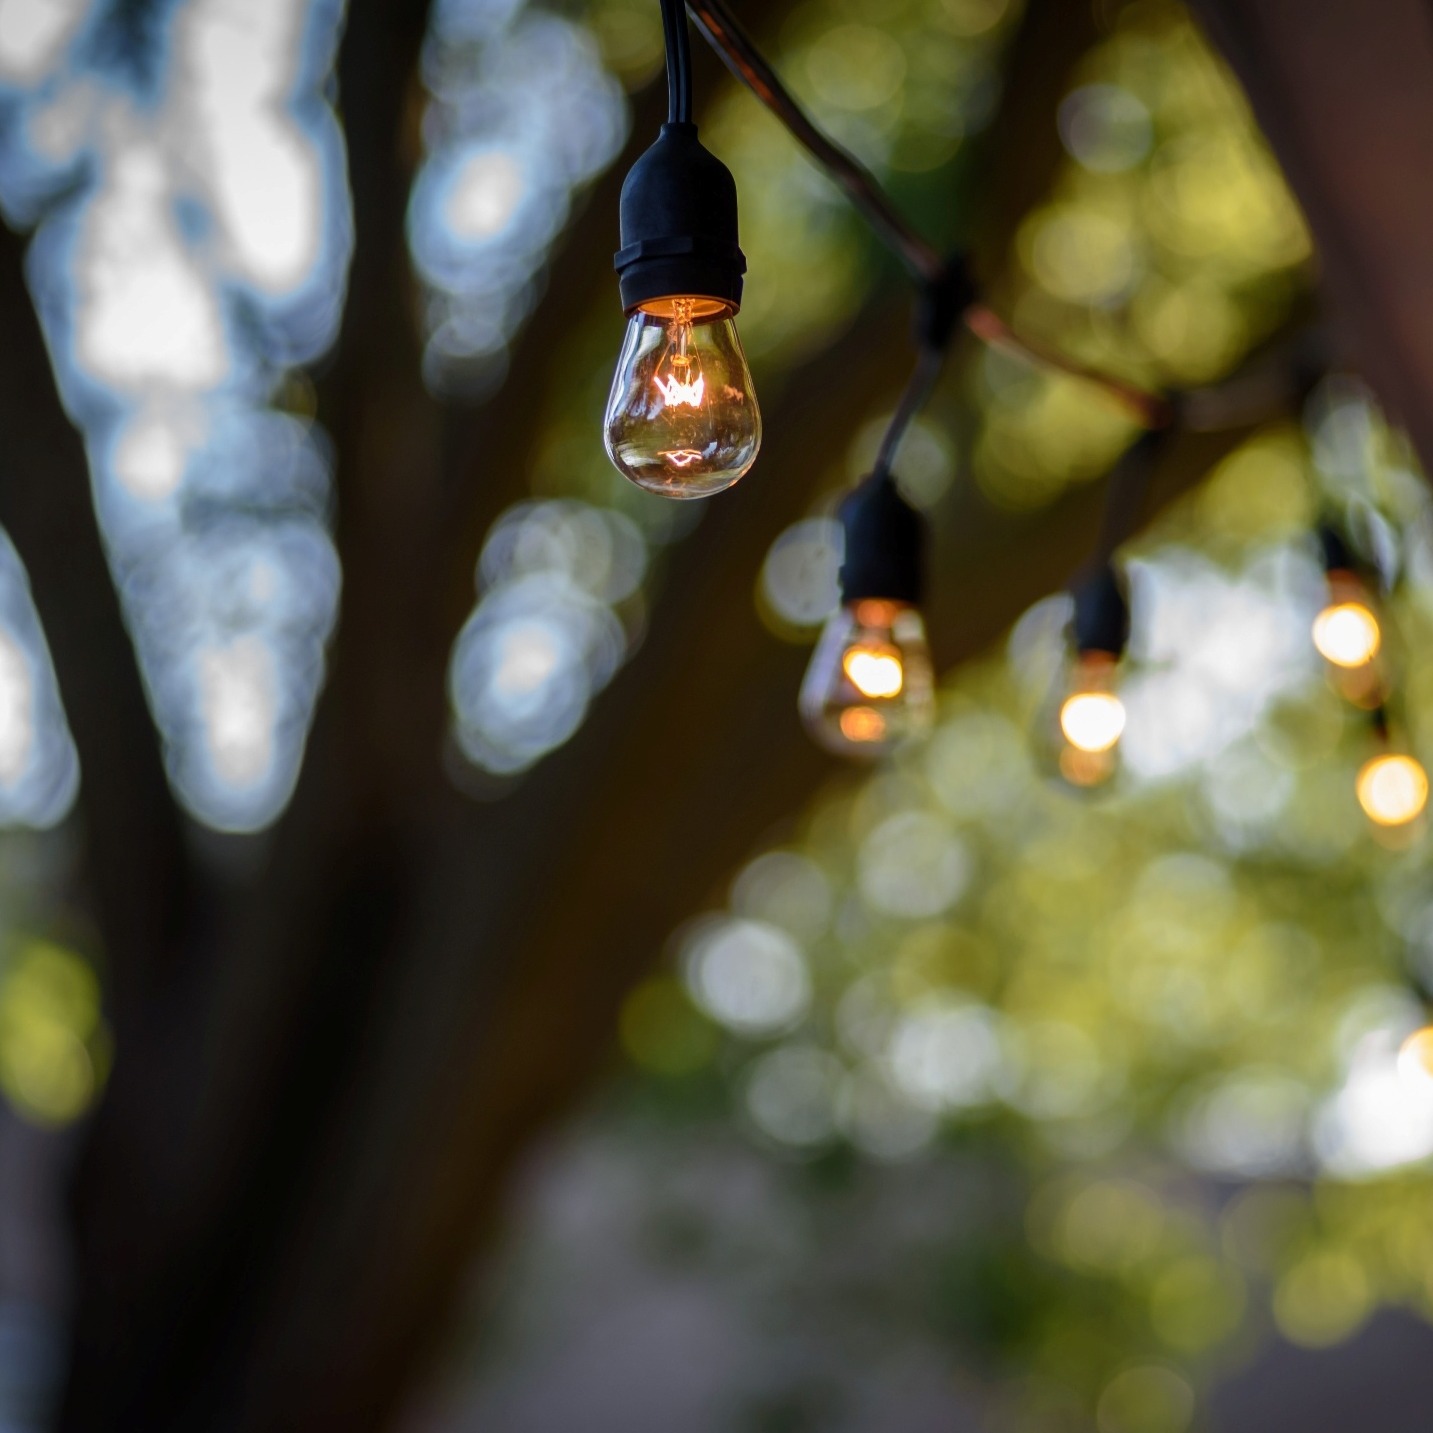 string-of-retro-style-clear-edison-light-bulbs-with-glowing-filaments-hanging-outside-at-dusk-with_t20_AenkOZ- smaller-1